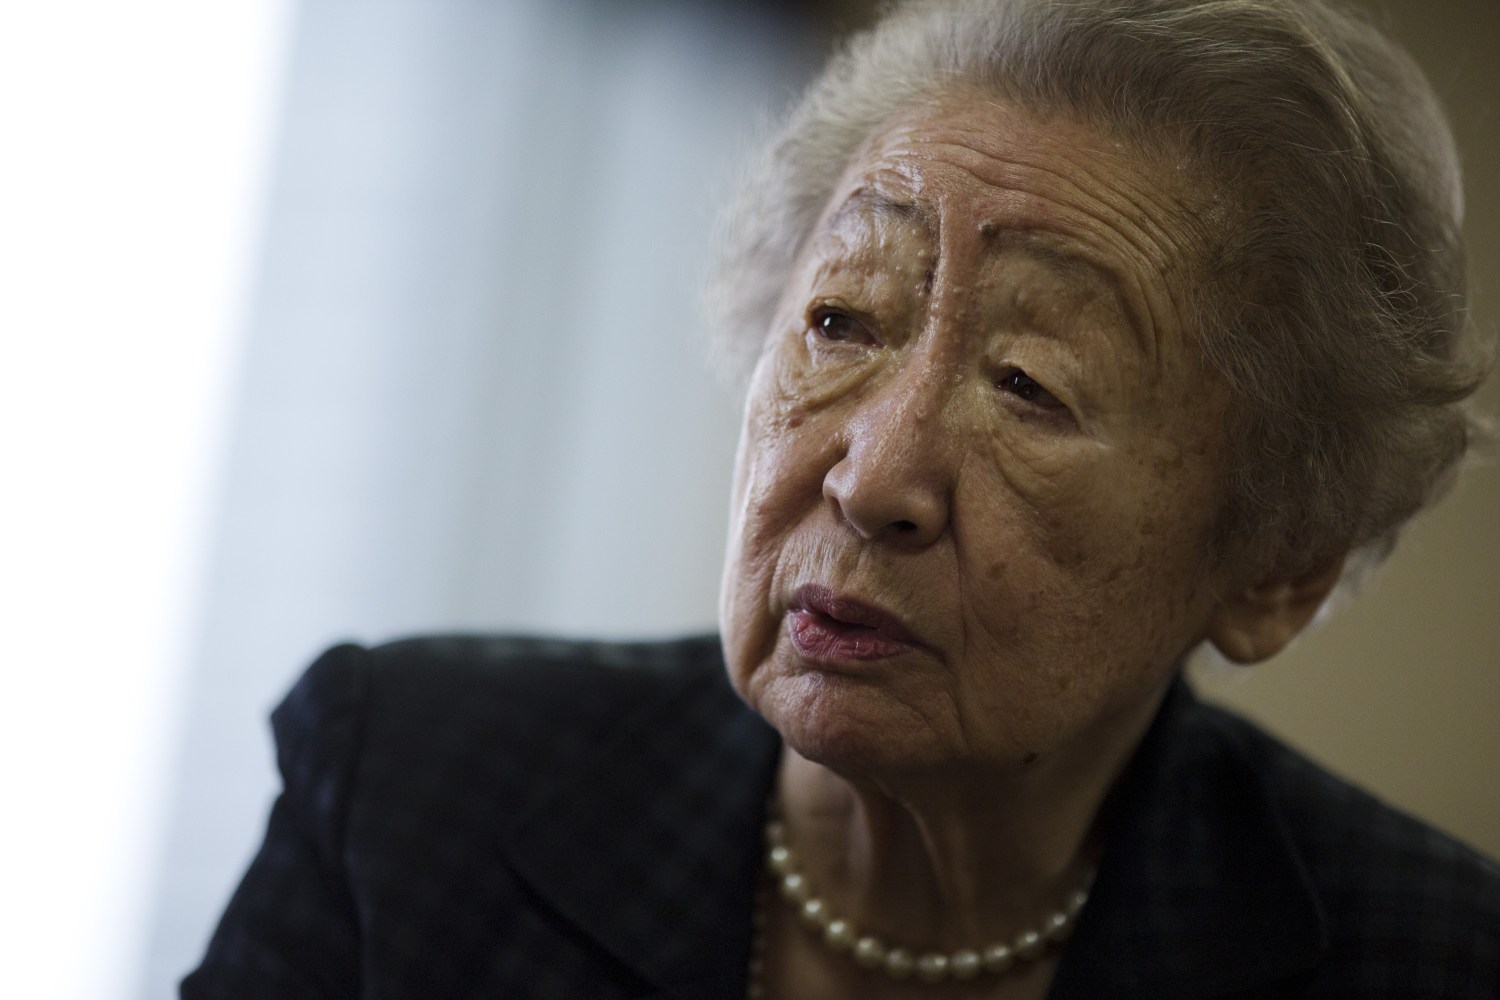 Sadako Ogata, former U.N. High Commissioner for Refugees, speaks during an interview in Tokyo, October 29, 2015. Japan, which accepted less than a dozen asylum seekers last year, should show more leadership on refugees and craft an immigration policy given its need for foreign workers, the former U.N. High Commissioner for Refugees said on Thursday. Ogata, 88, whose great-grandfather, then-premier Tsuyoshi Inukai, was assassinated by radical naval officers in 1932, also said that while Japan's military had a global role to play, it should not be one that involved fighting overseas.  REUTERS/Thomas Peter - GF20000037482